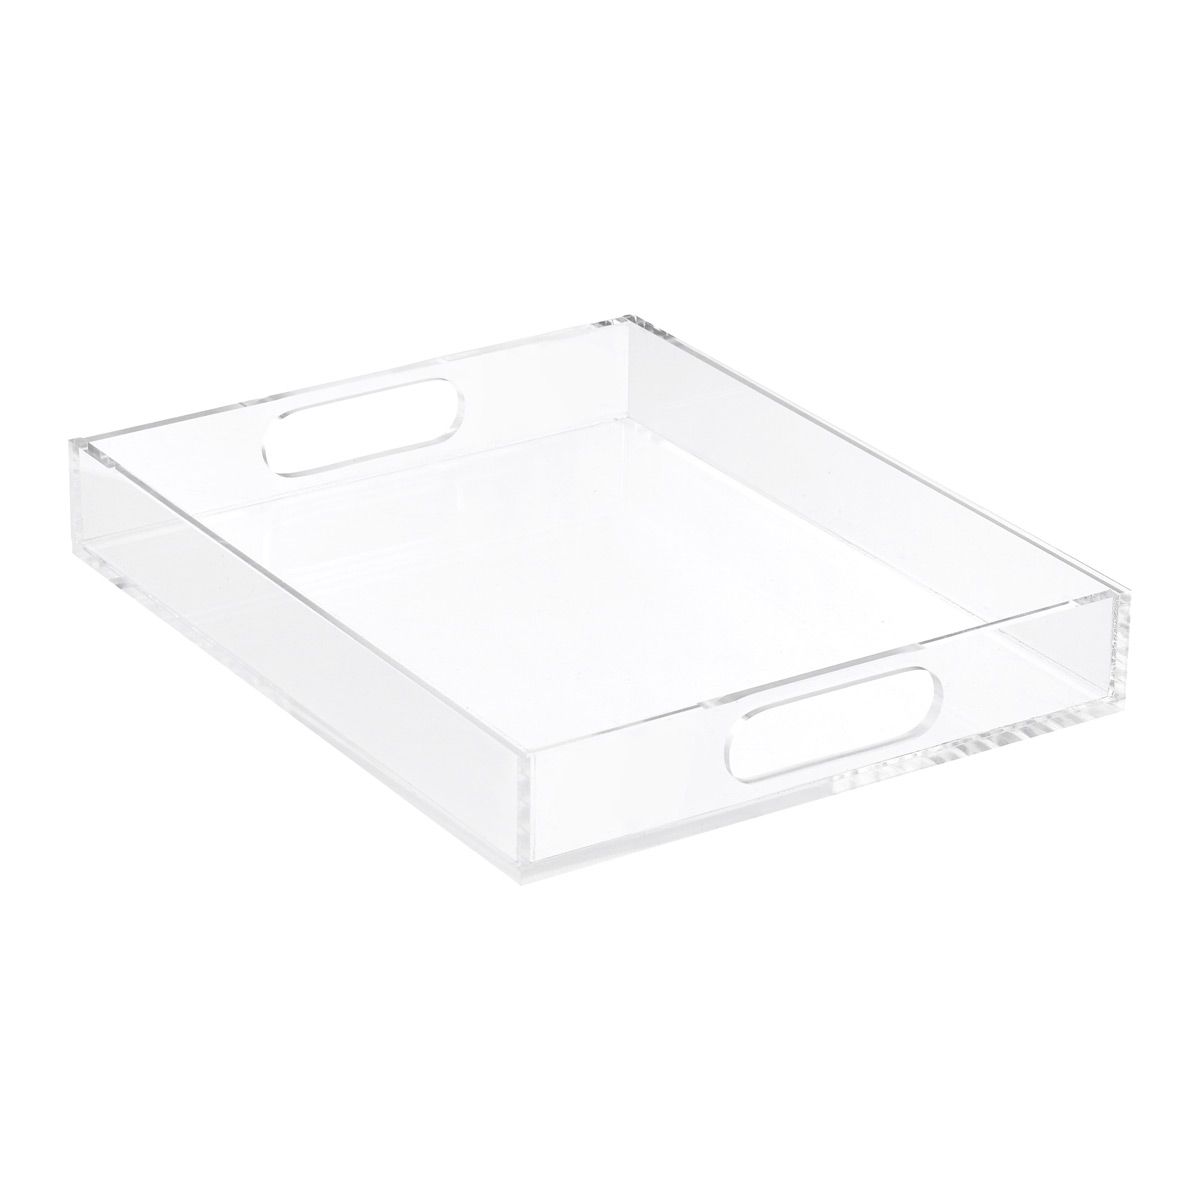 Premium Acrylic Paper Tray | The Container Store